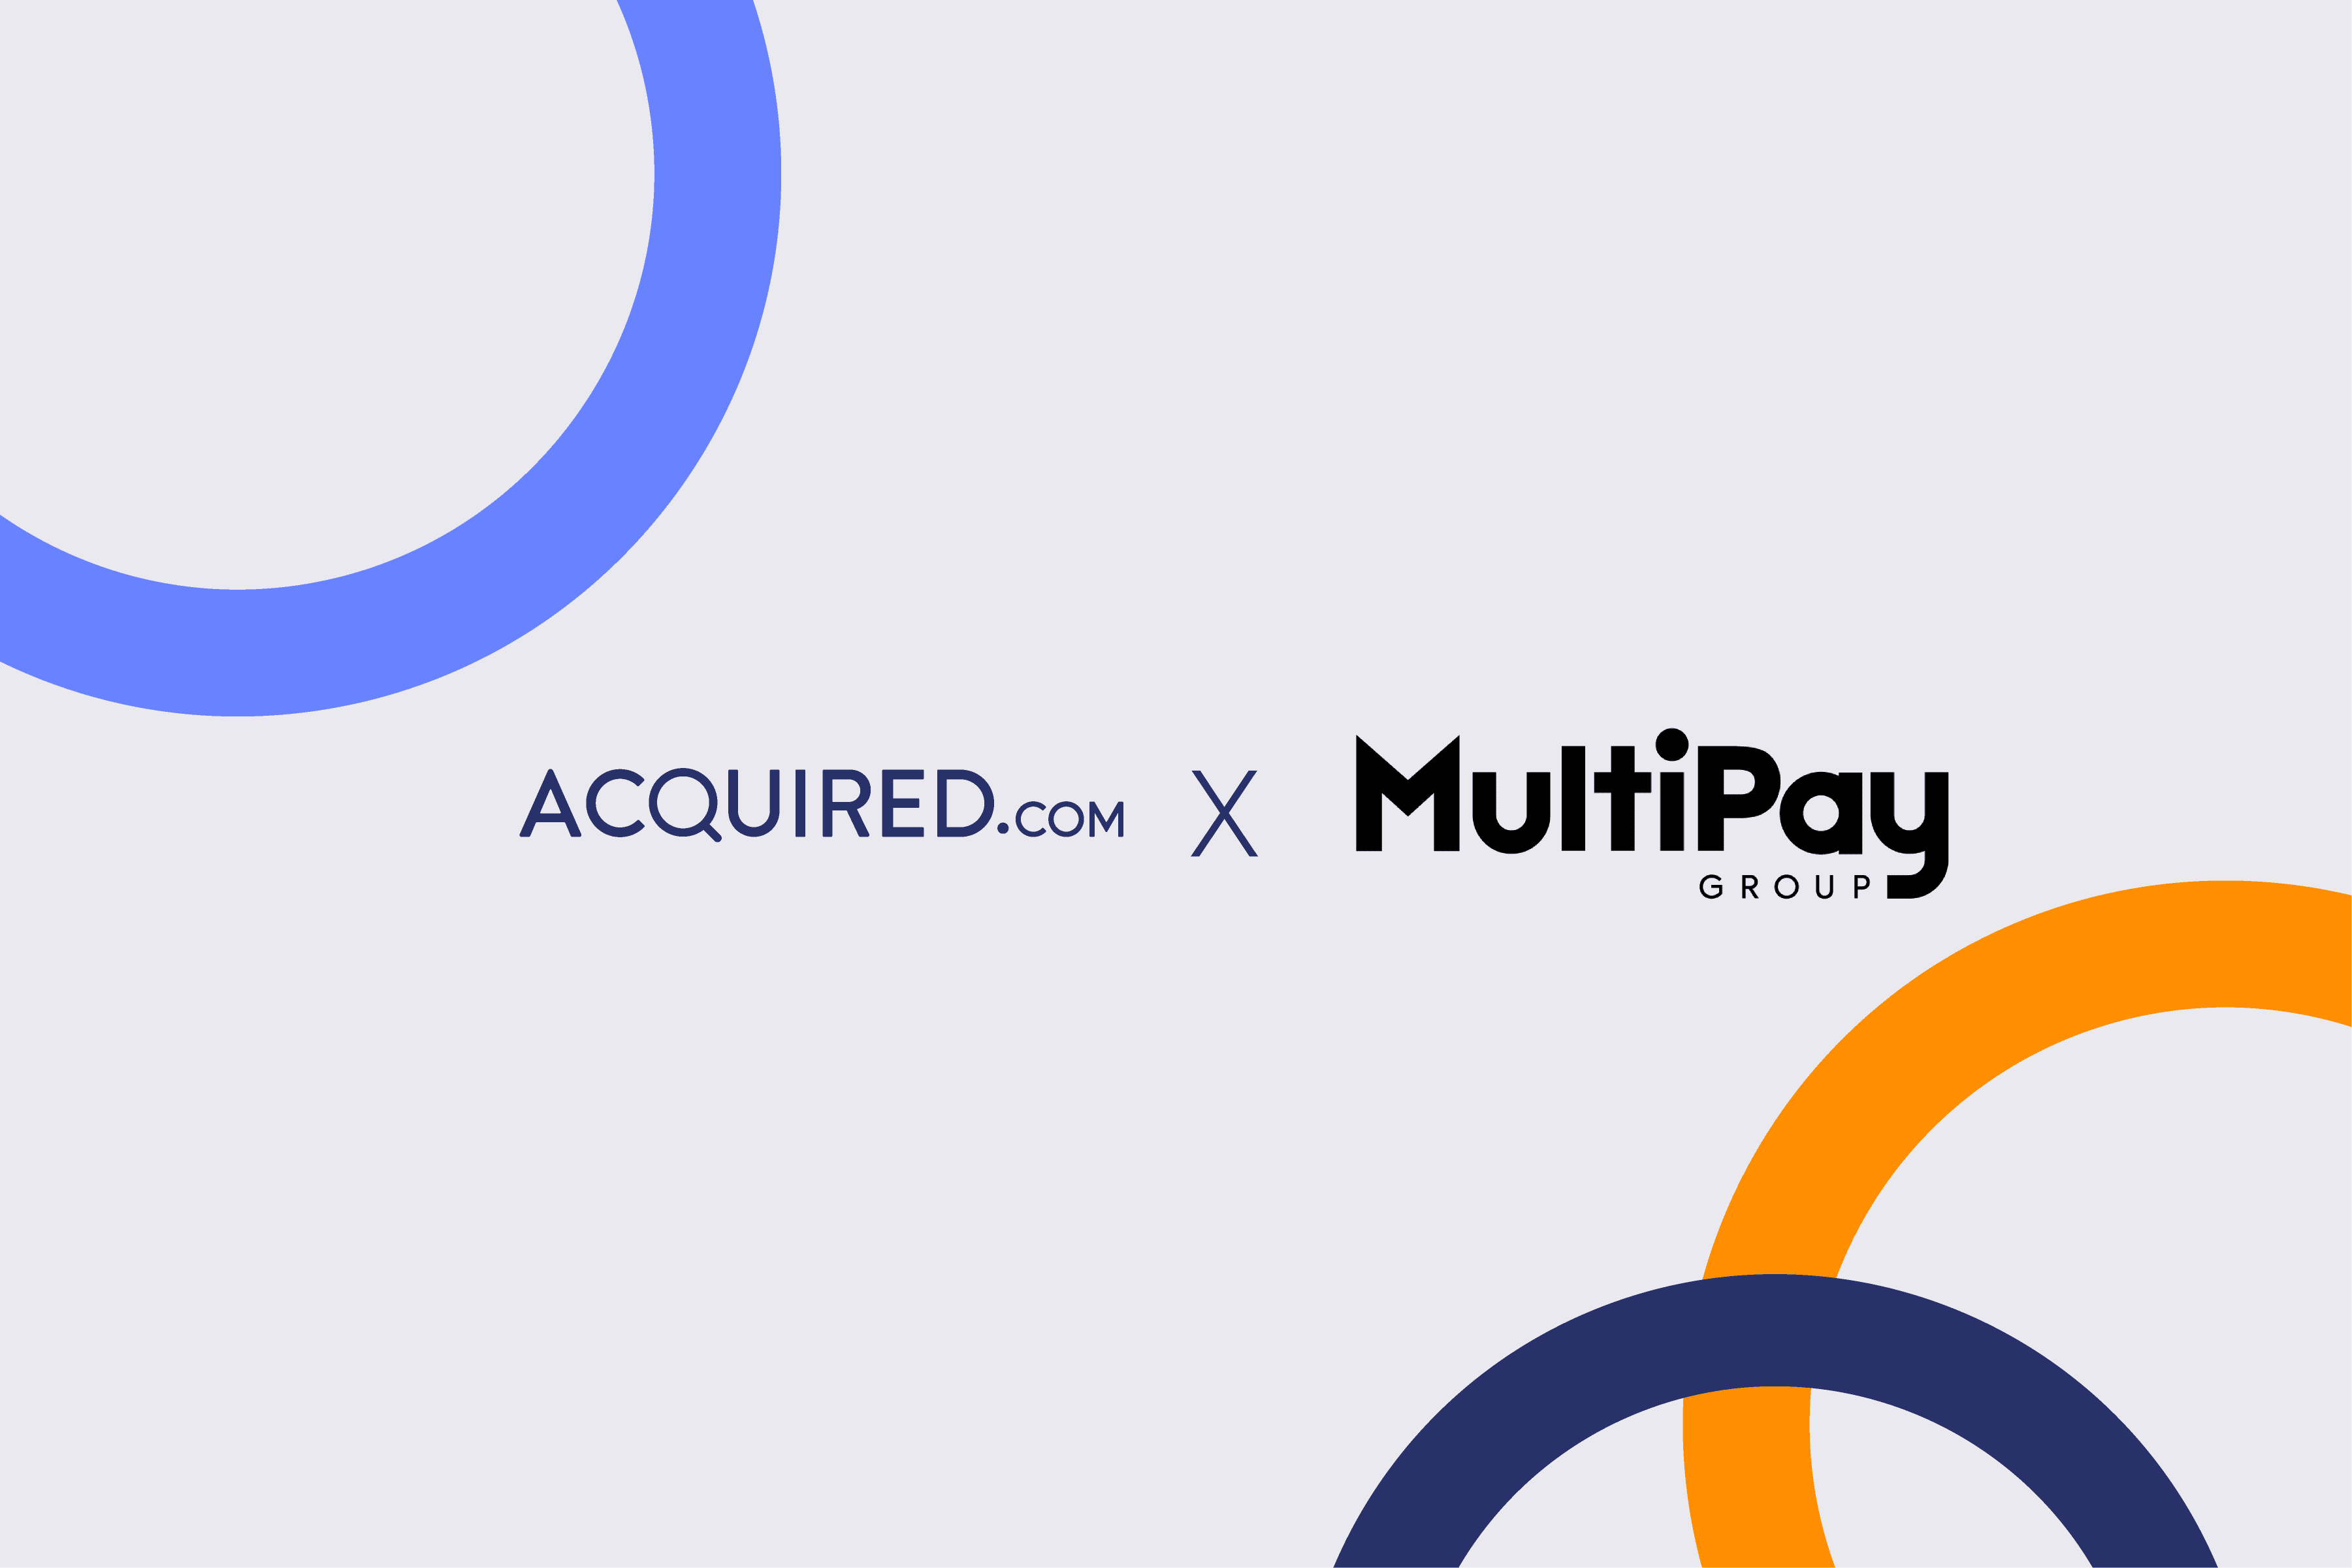 Multipay Acquired.com Partnership